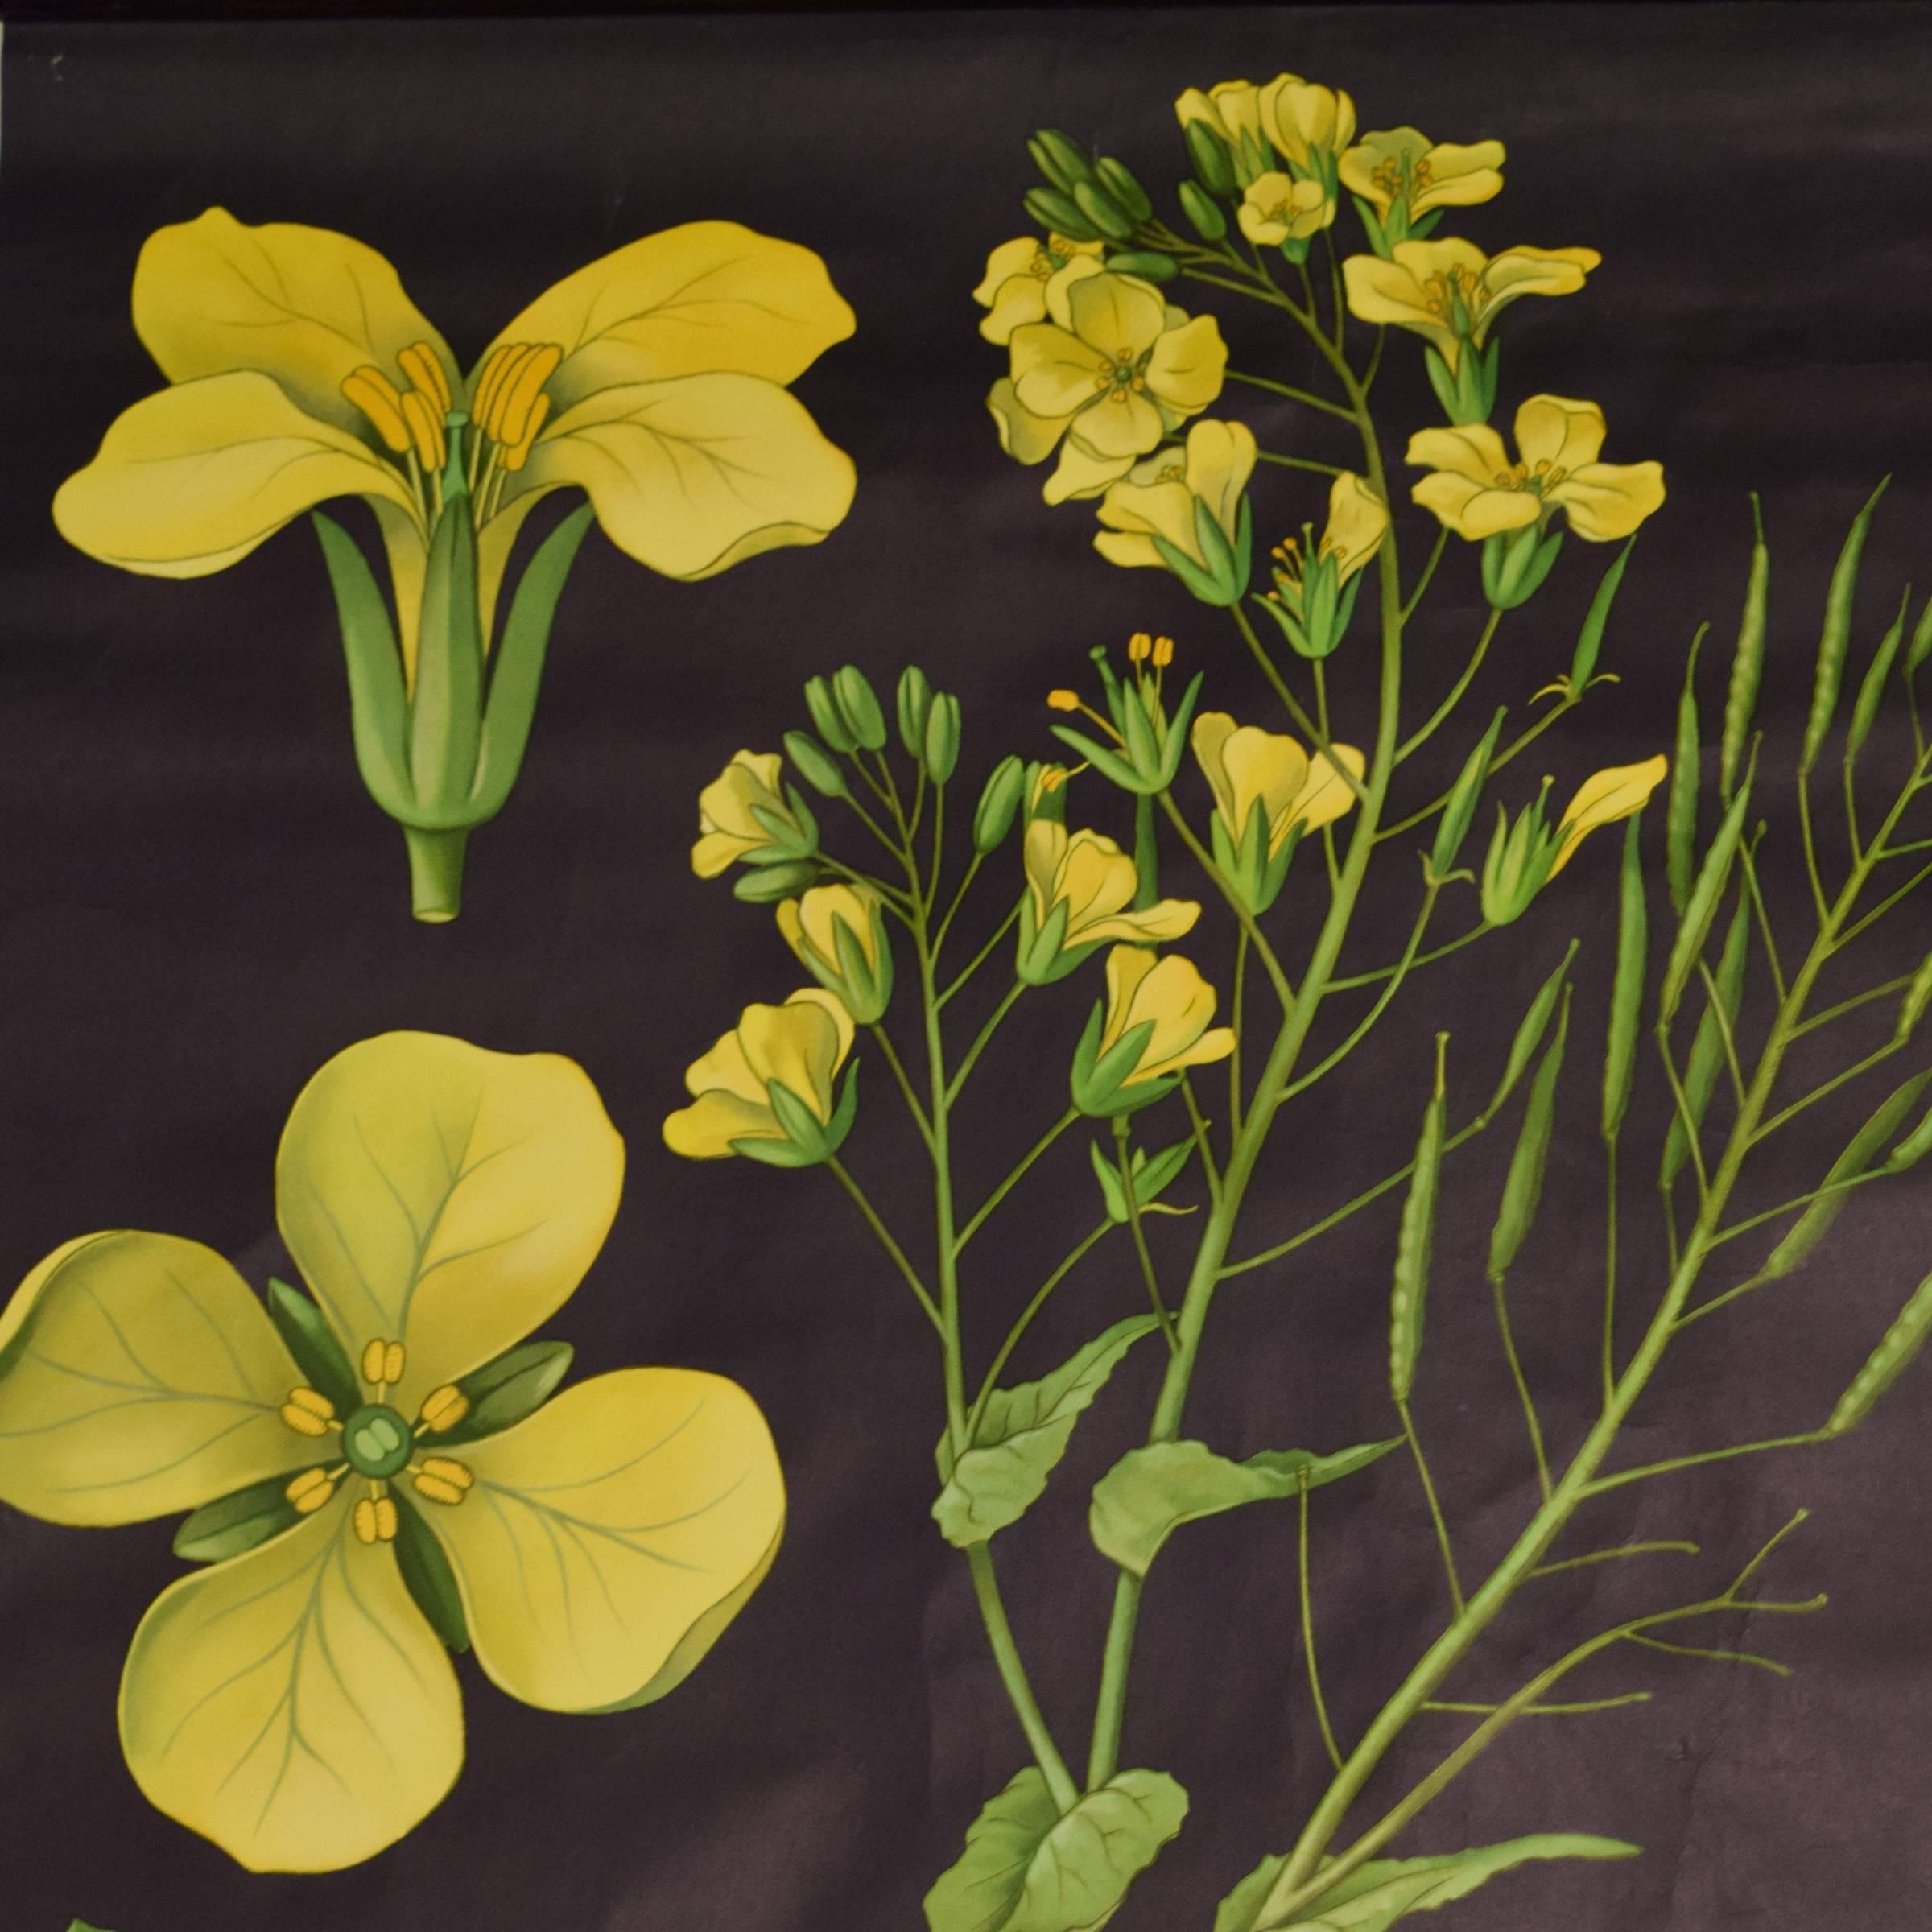 German rolled lithograph wall poster of a rapeseed flower illustrated by Jung Koch Quentell and published by Lehrmittelverlag Hagemann, Düsseldorf, the leading producer of educational botanical and zoological charts in the world, circa 1960.